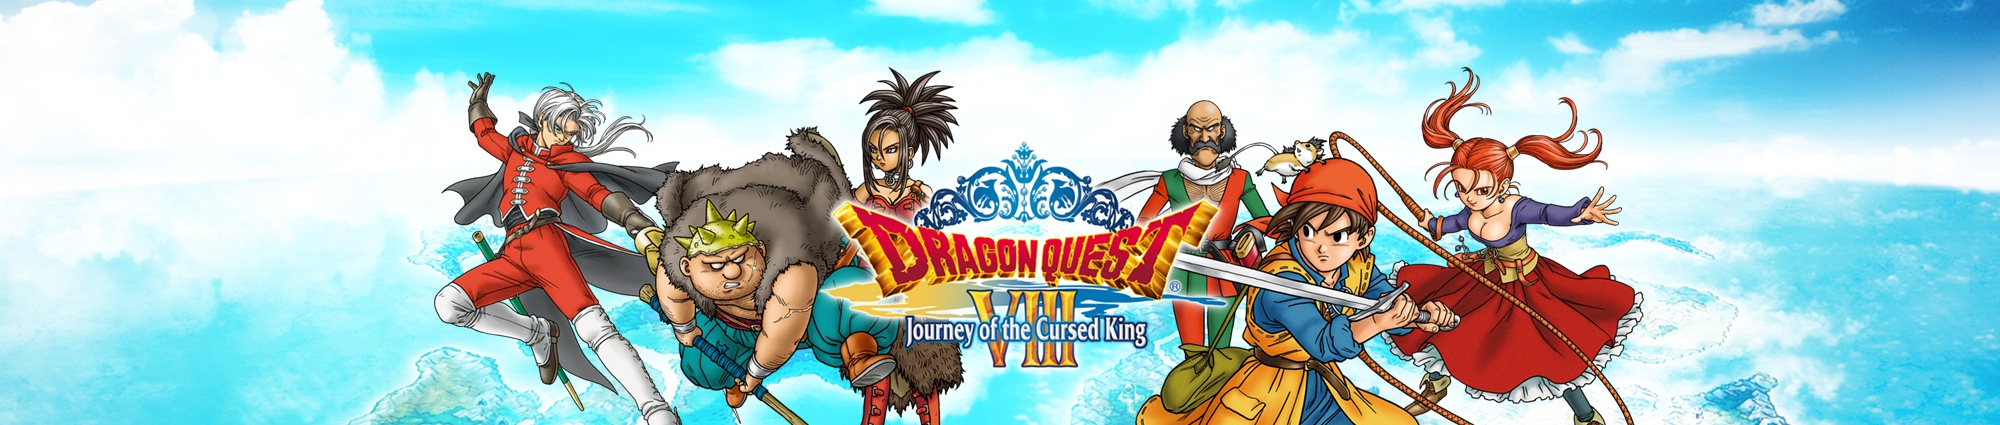 Banner Dragon Quest VIII Journey of the Cursed King